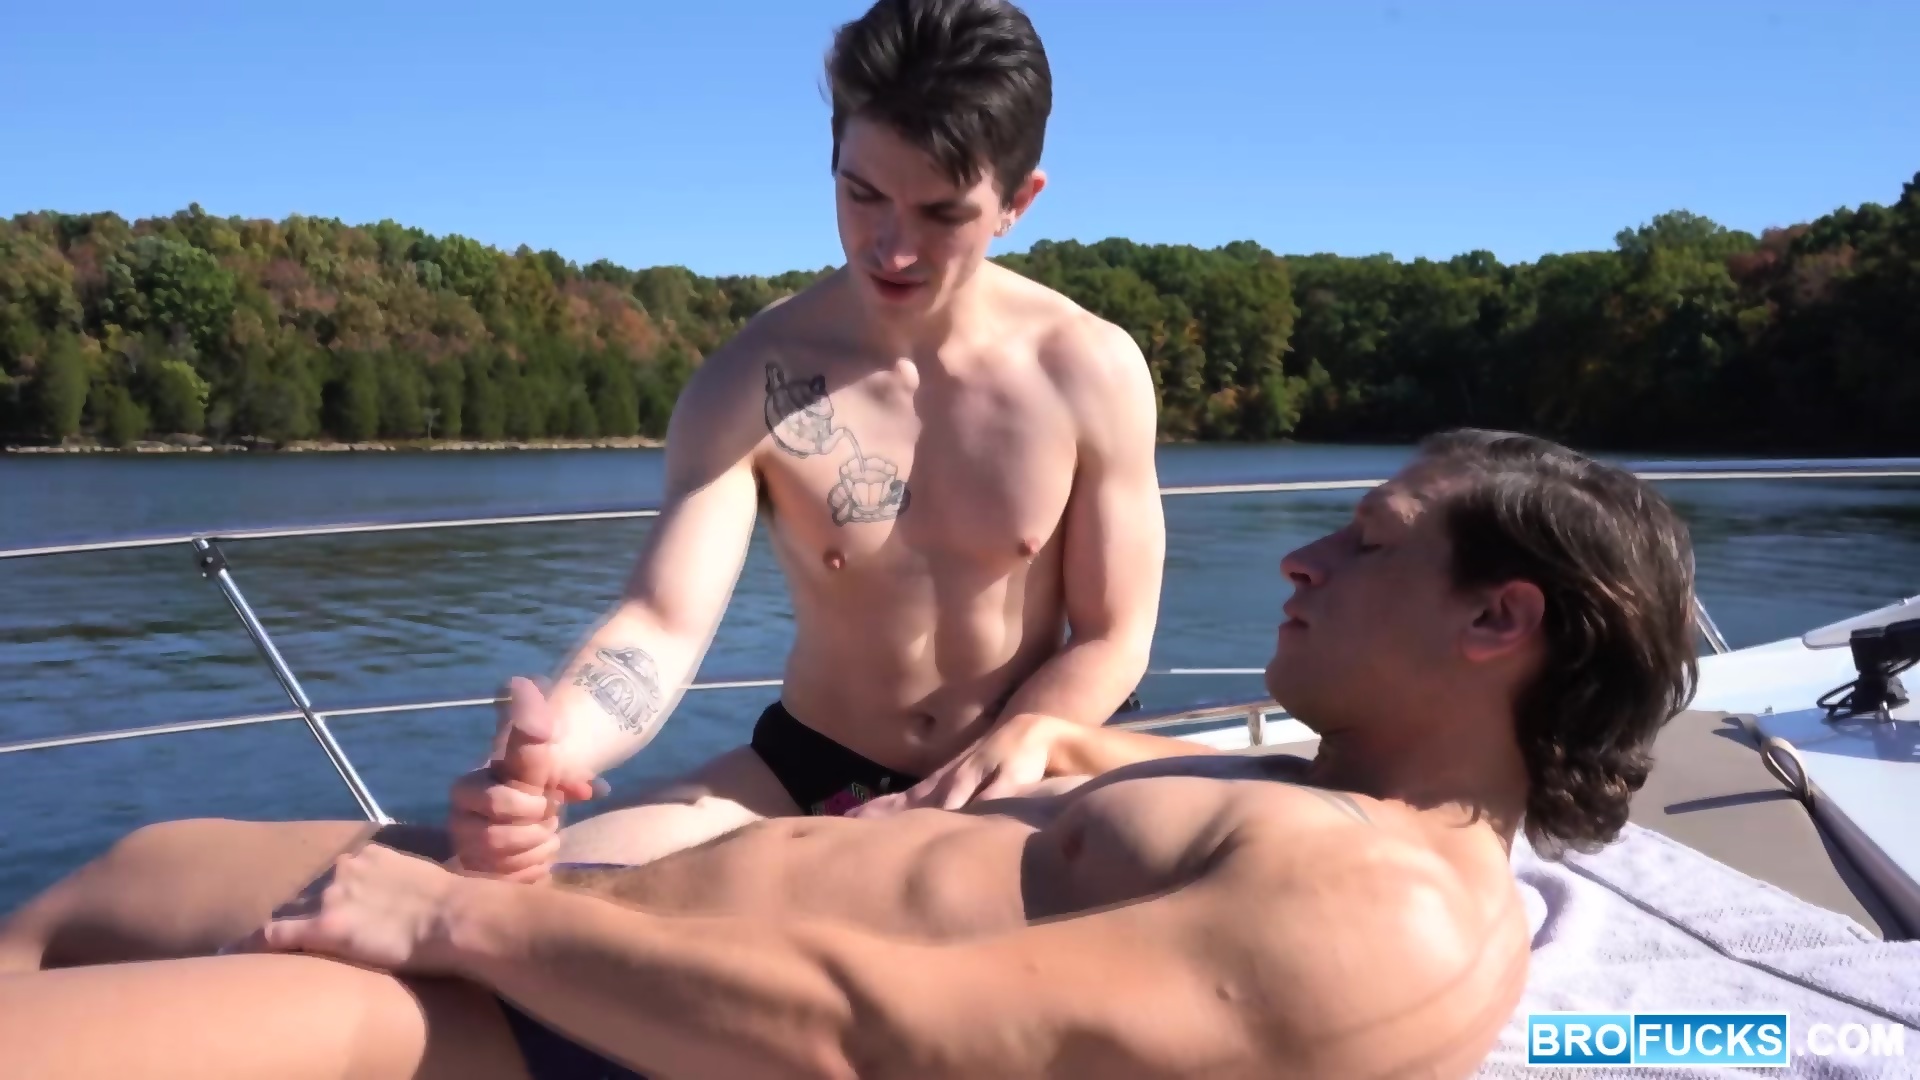 Two Extremely Hot Gay Hunks Having Raw Sex On Boat!